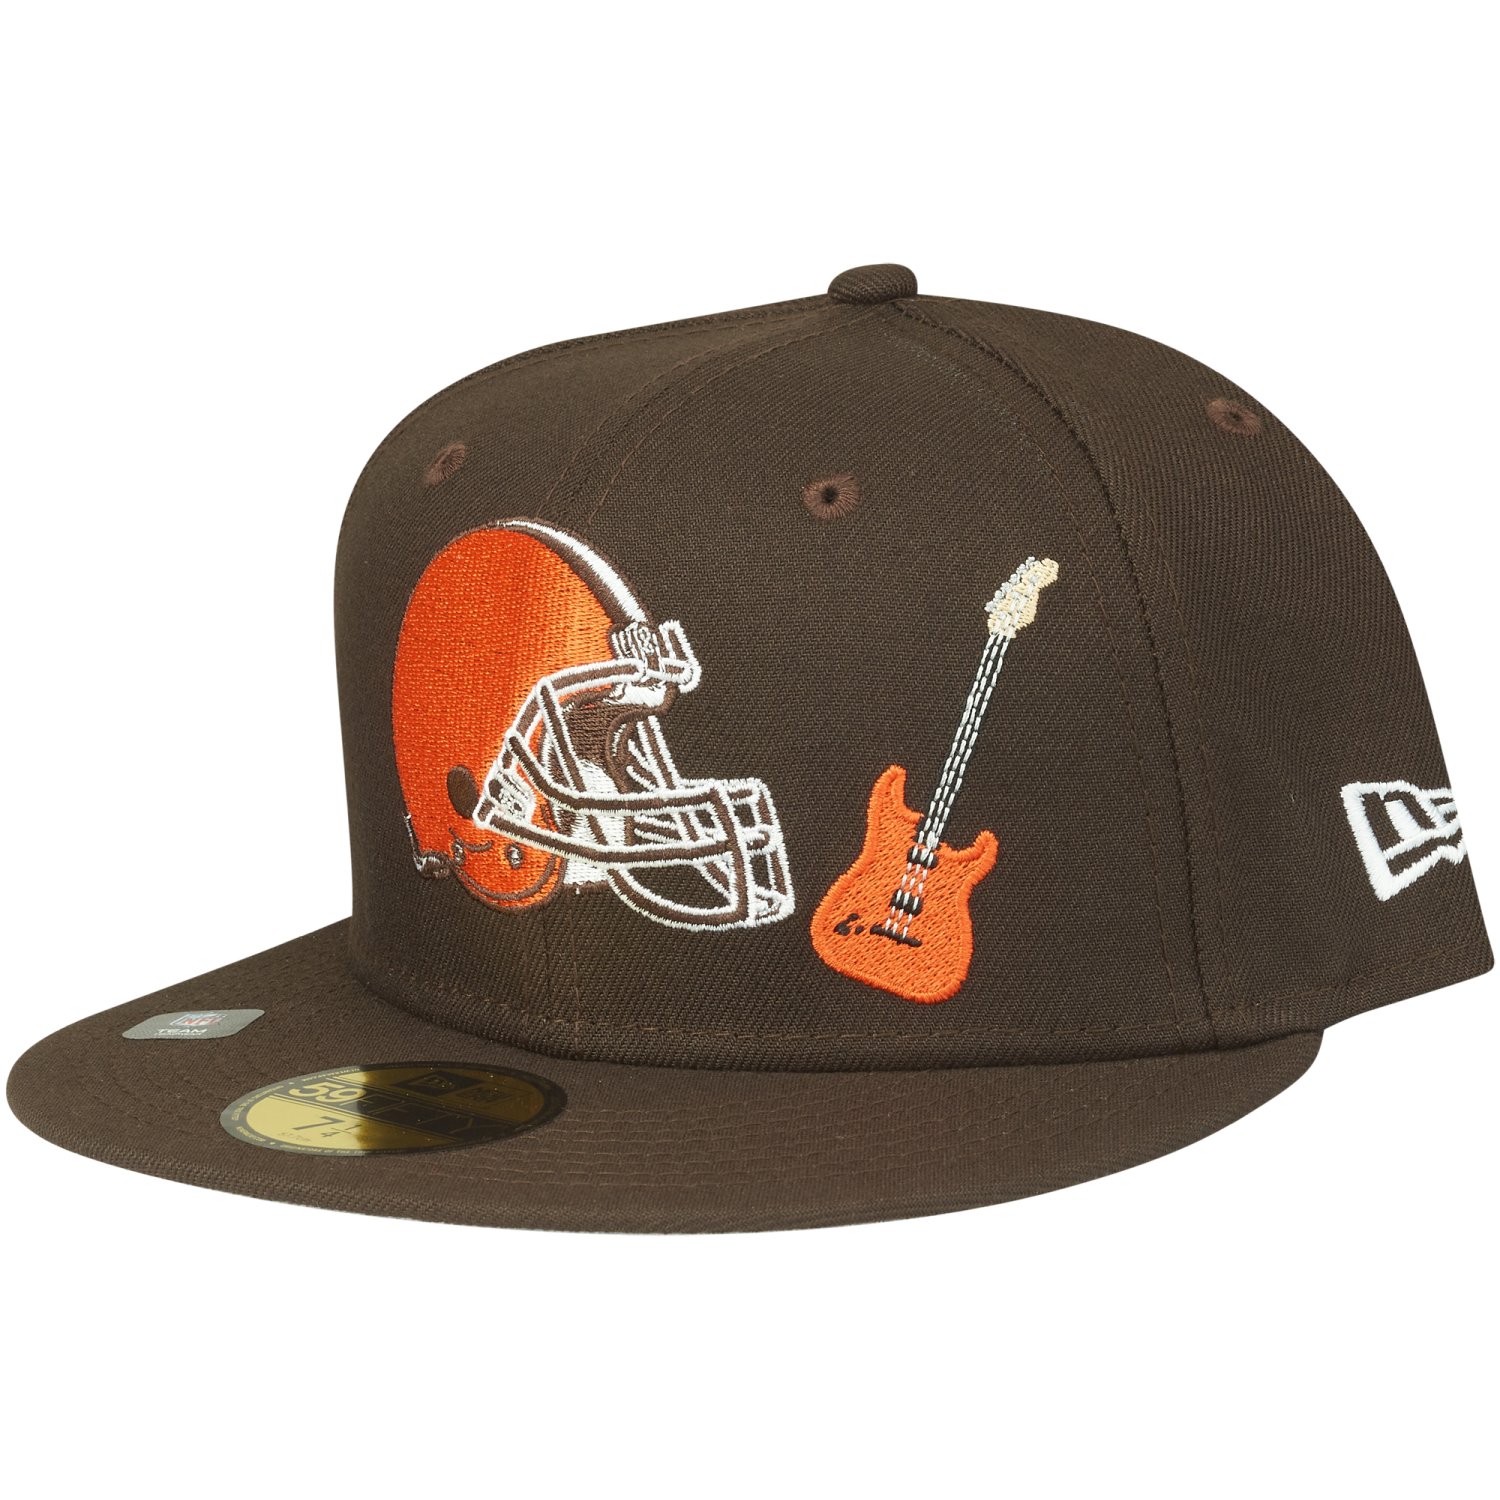 New Era 59fifty Fitted Cap Nfl City Cleveland Browns Fitted Caps